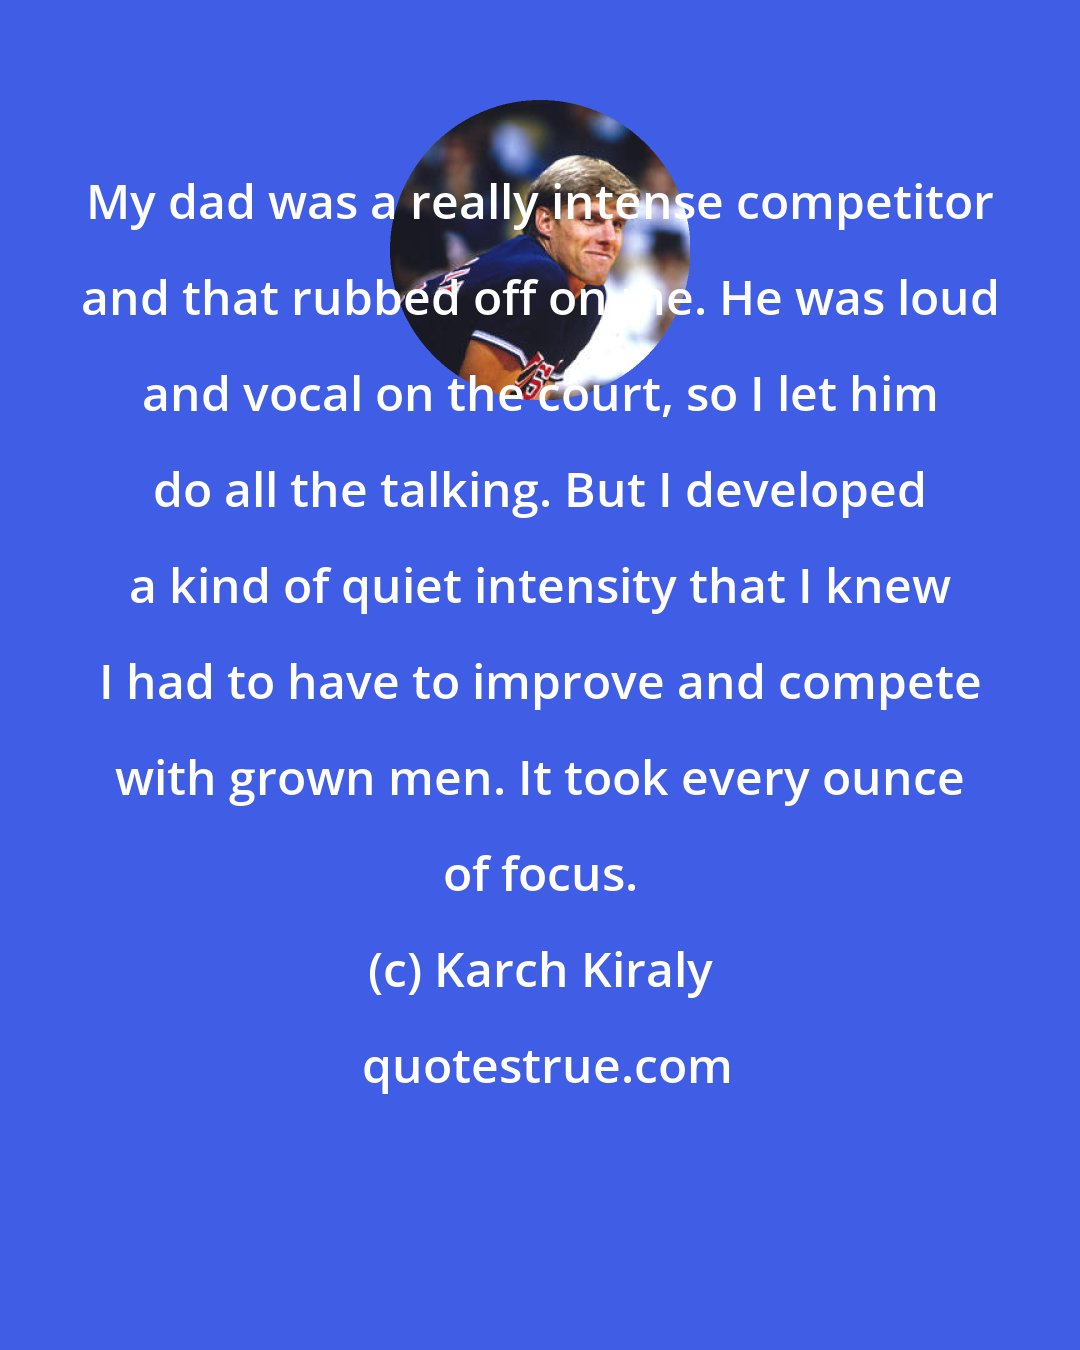 Karch Kiraly: My dad was a really intense competitor and that rubbed off on me. He was loud and vocal on the court, so I let him do all the talking. But I developed a kind of quiet intensity that I knew I had to have to improve and compete with grown men. It took every ounce of focus.